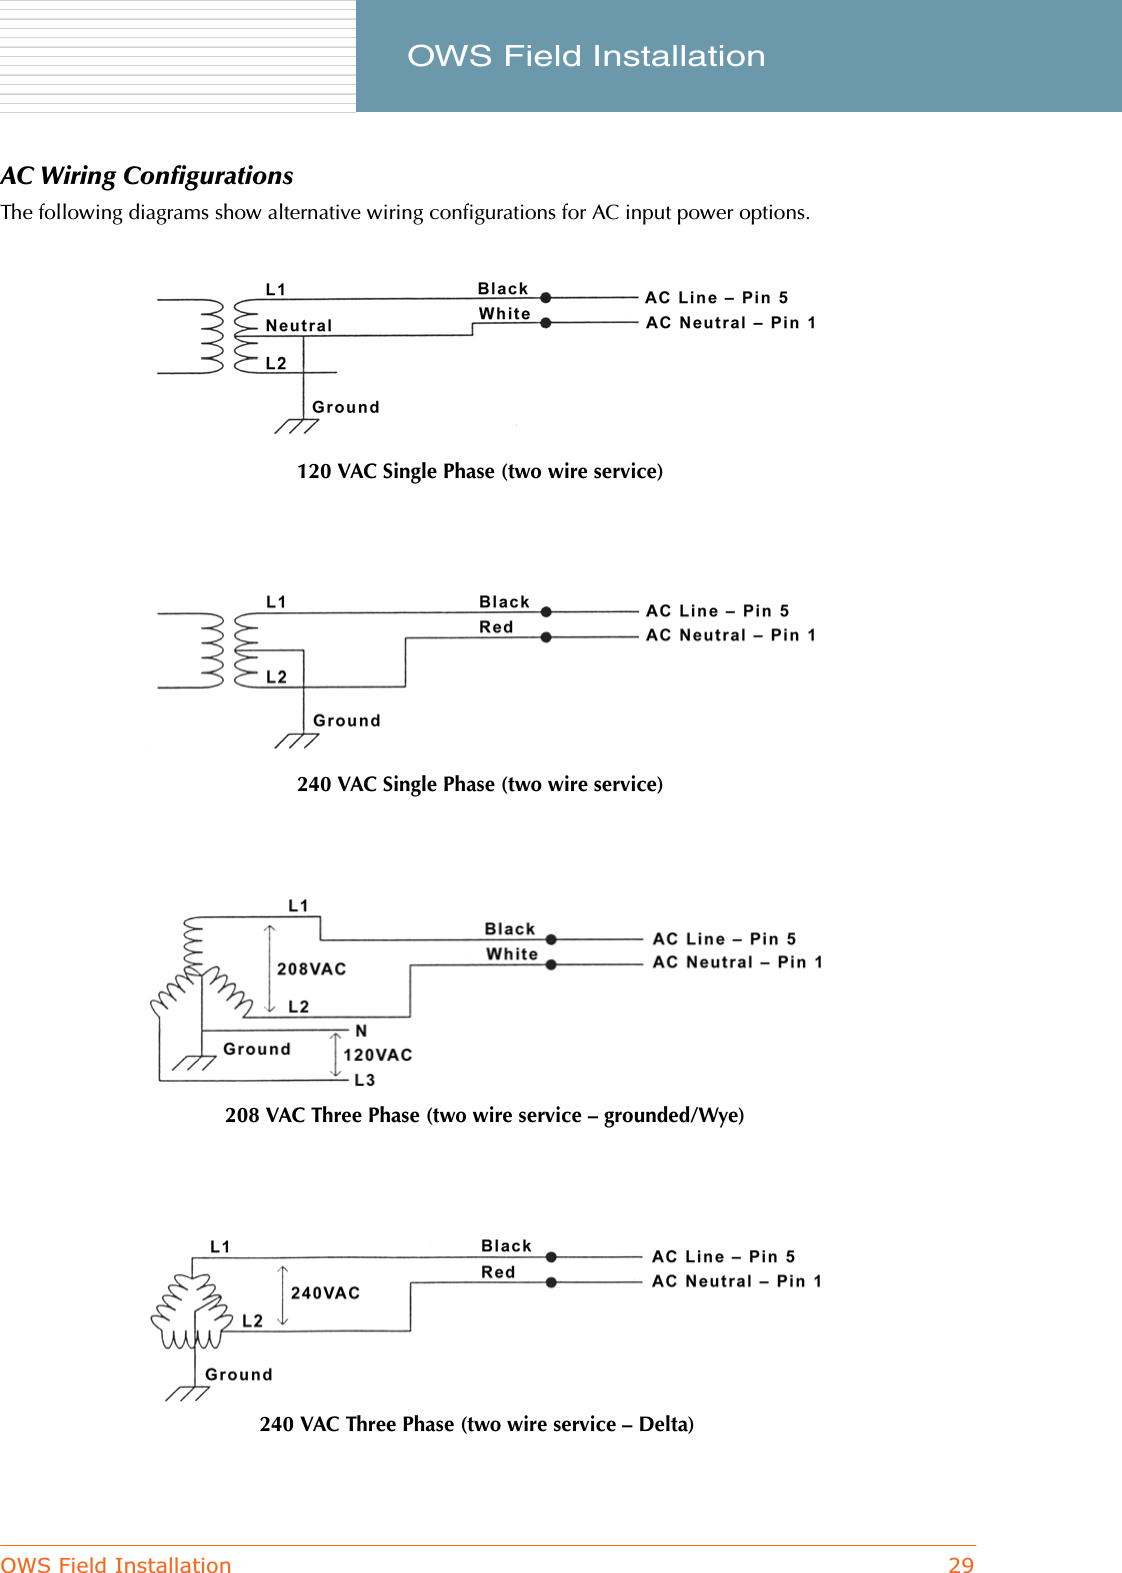 OWS Field Installation 29     OWS Field InstallationAC Wiring ConfigurationsThe following diagrams show alternative wiring configurations for AC input power options.120 VAC Single Phase (two wire service)240 VAC Single Phase (two wire service)208 VAC Three Phase (two wire service – grounded/Wye) 240 VAC Three Phase (two wire service – Delta)